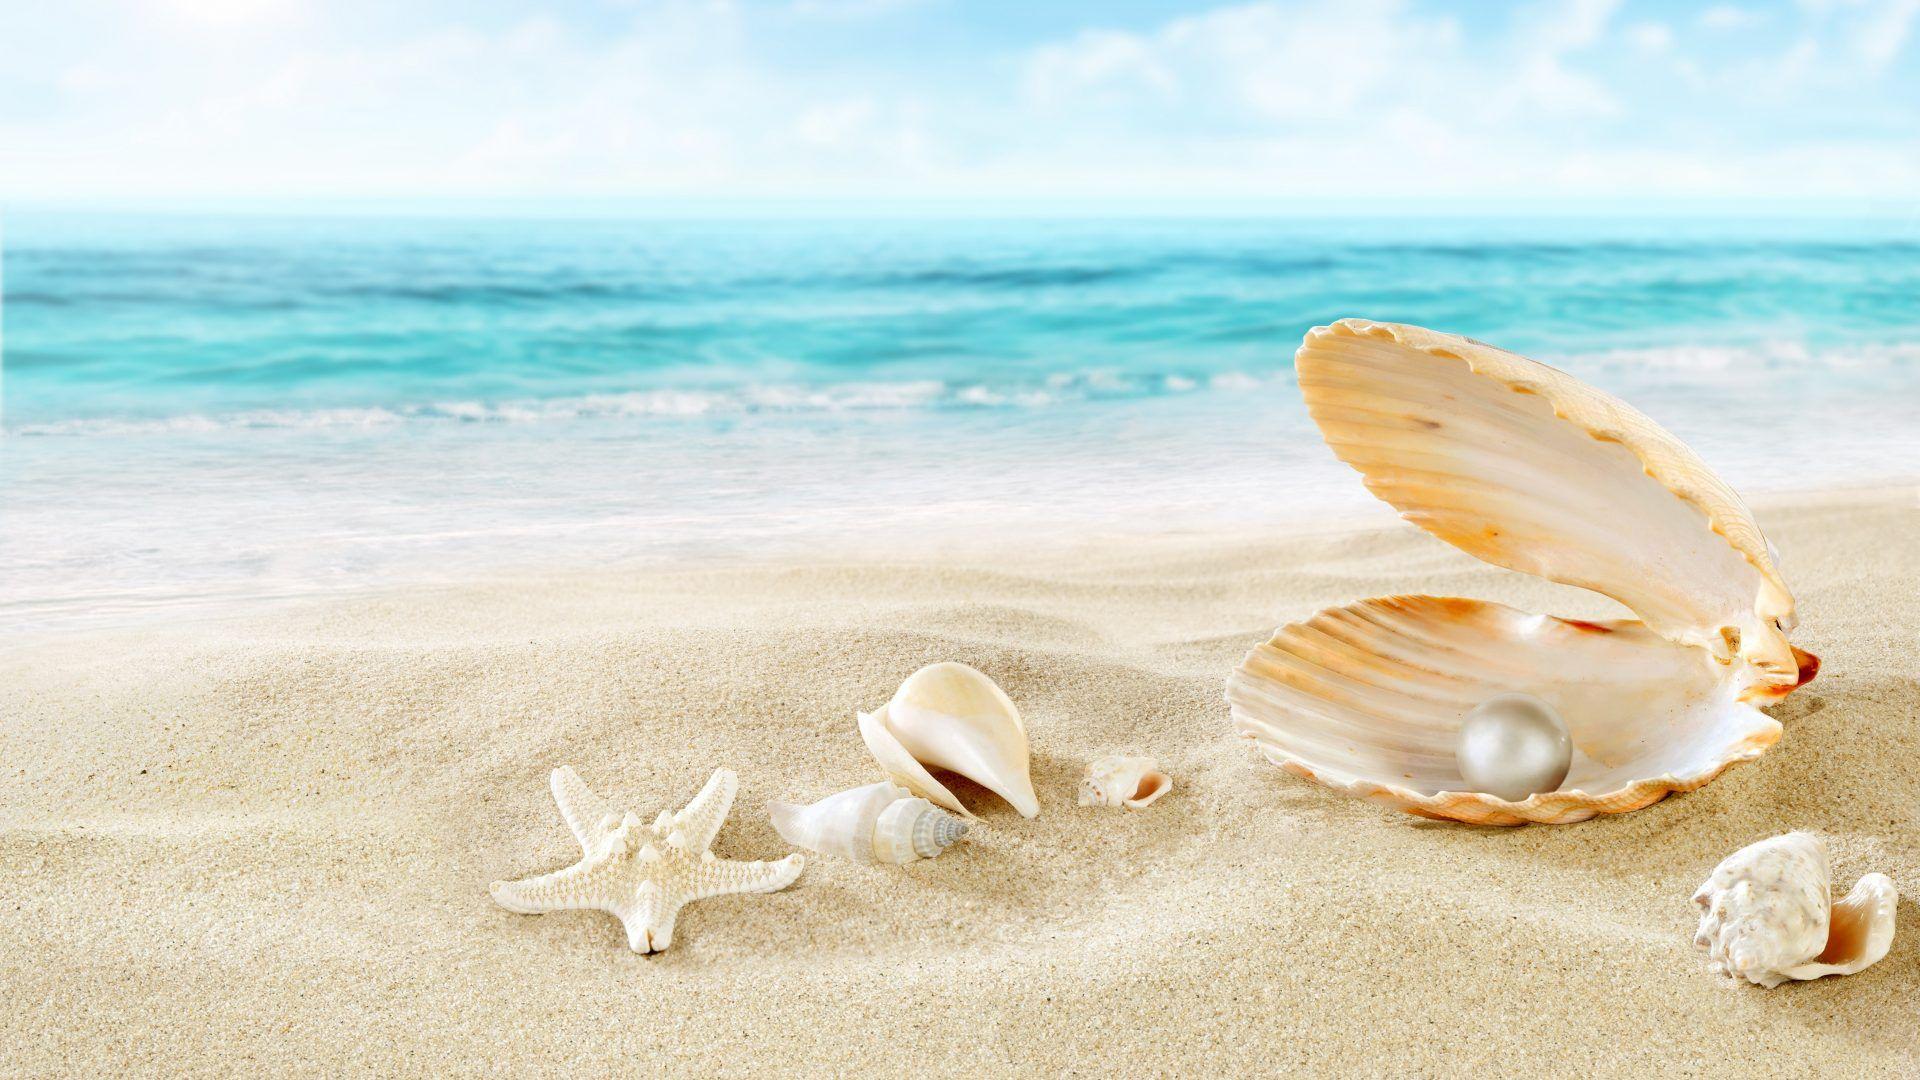 Colorful seashells  Other  Abstract Background Wallpapers on Desktop  Nexus Image 1149399